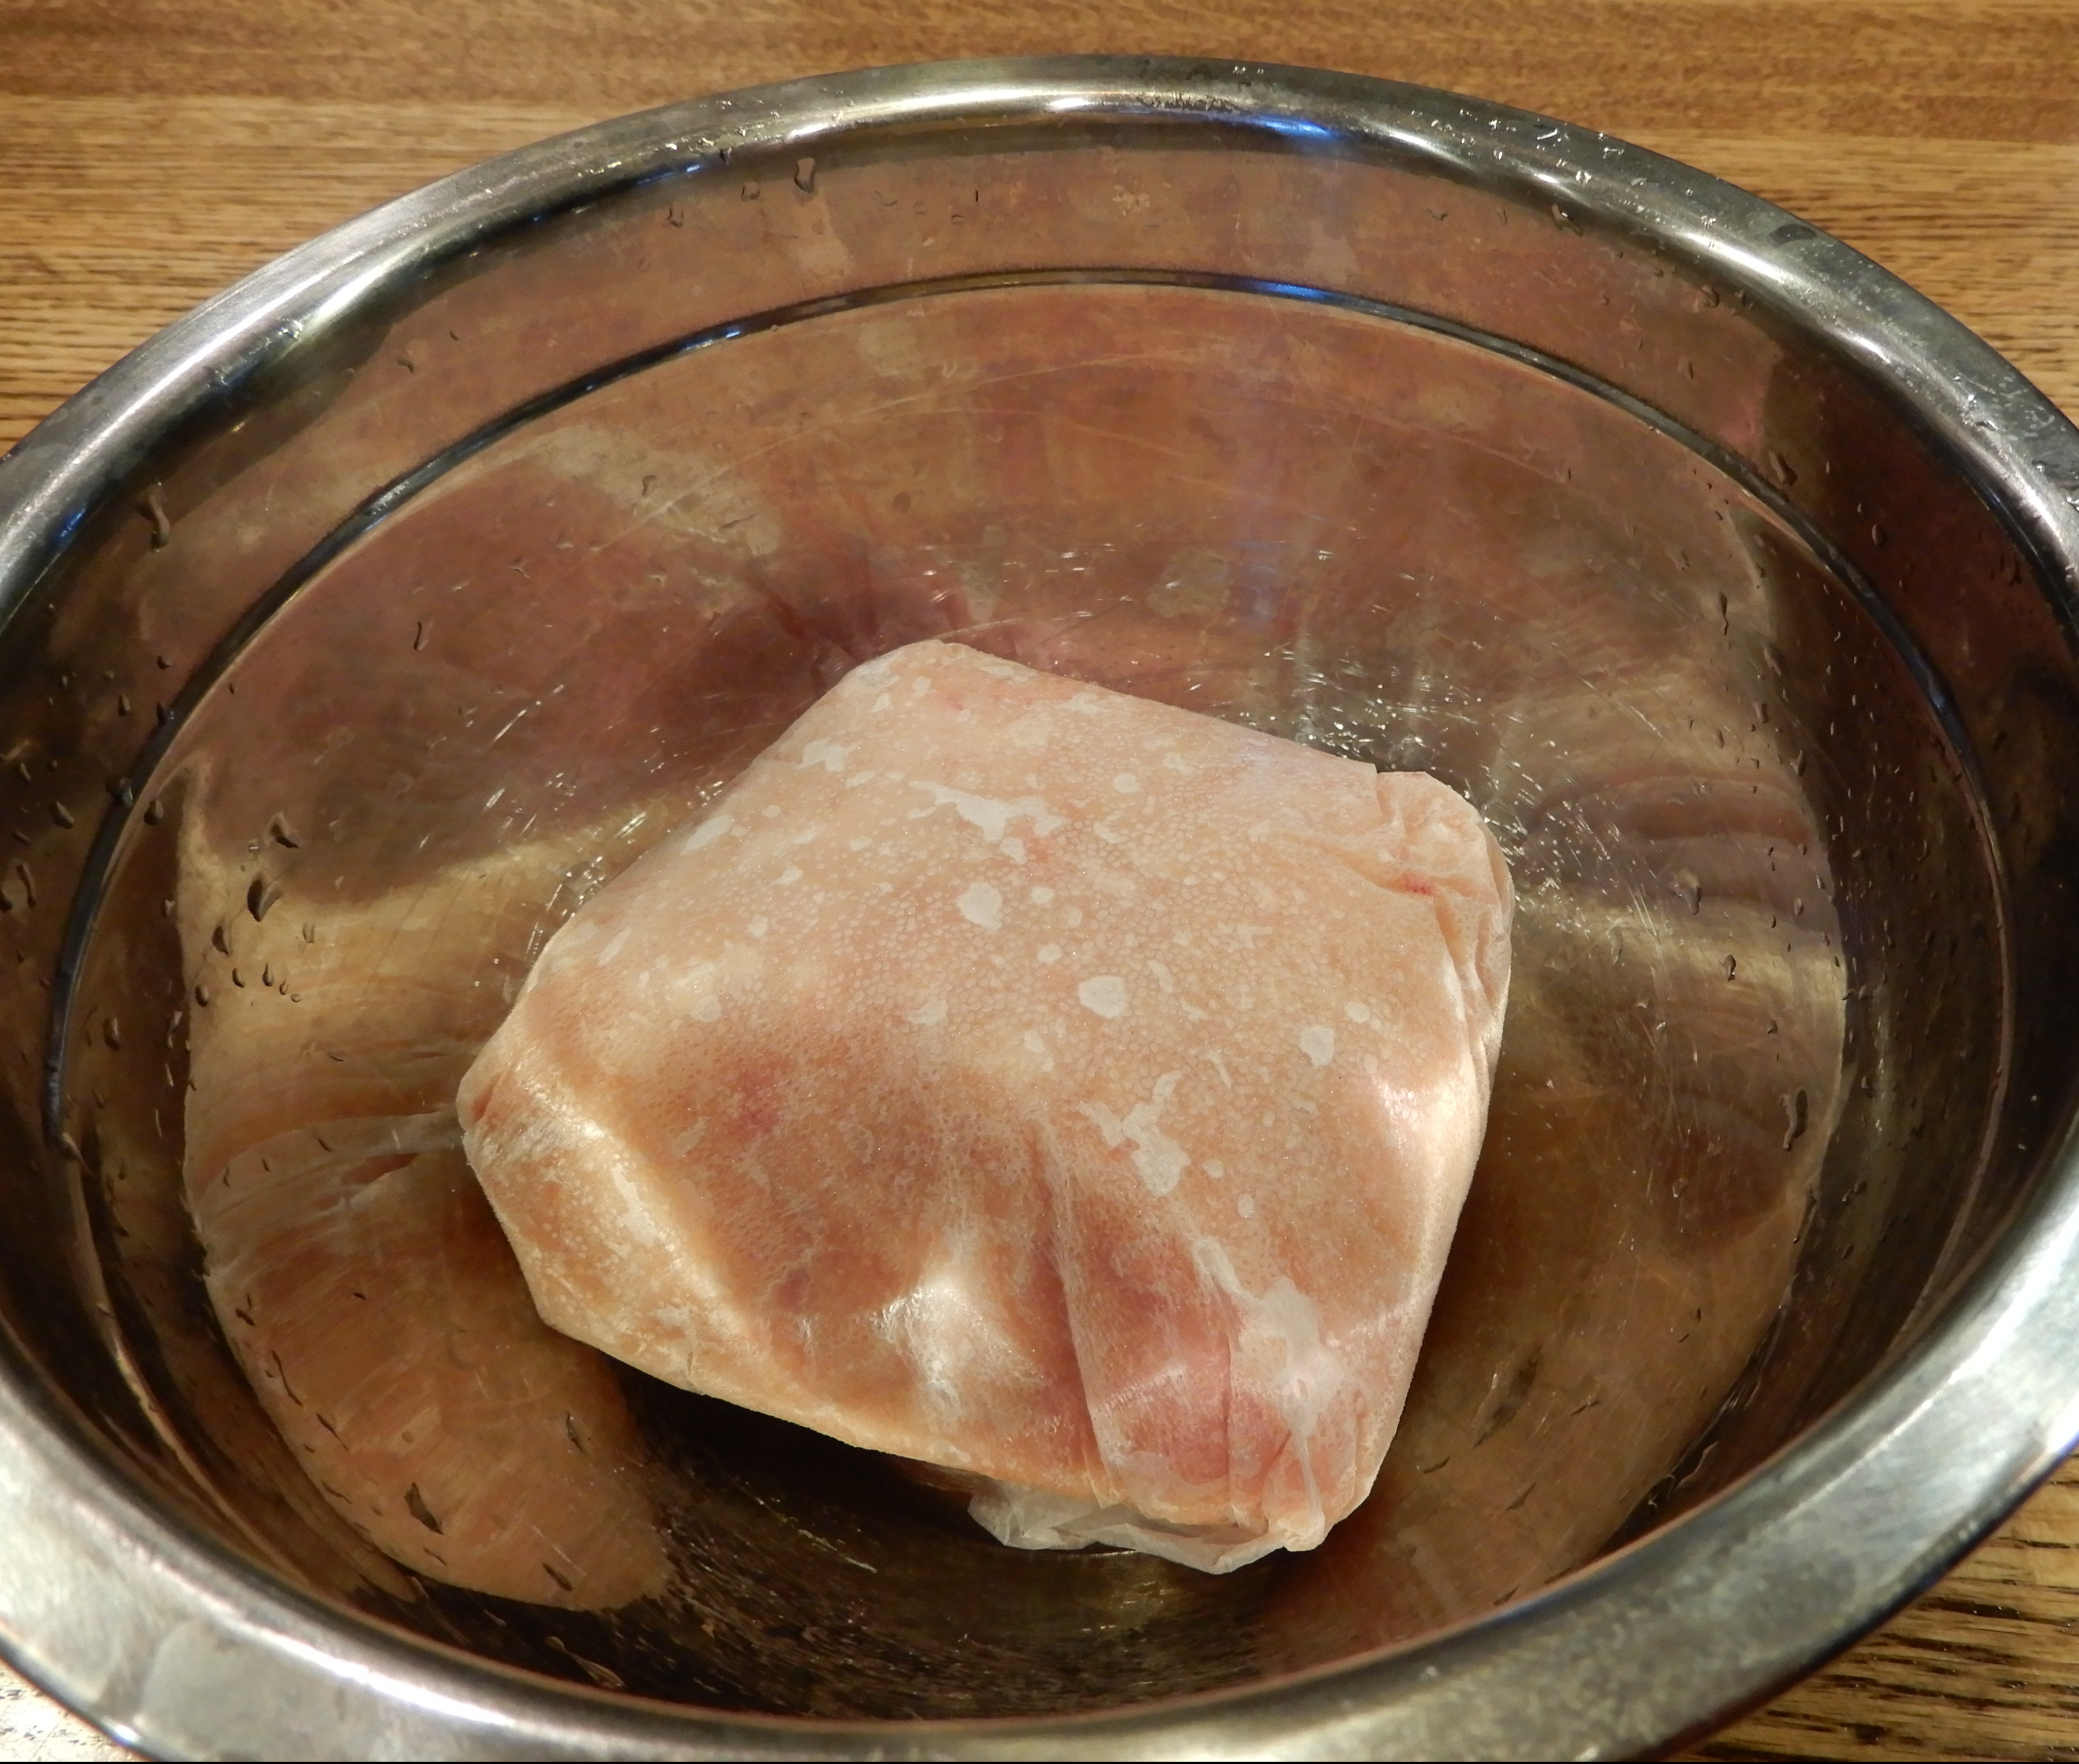 Raw chicken trim in the bowl